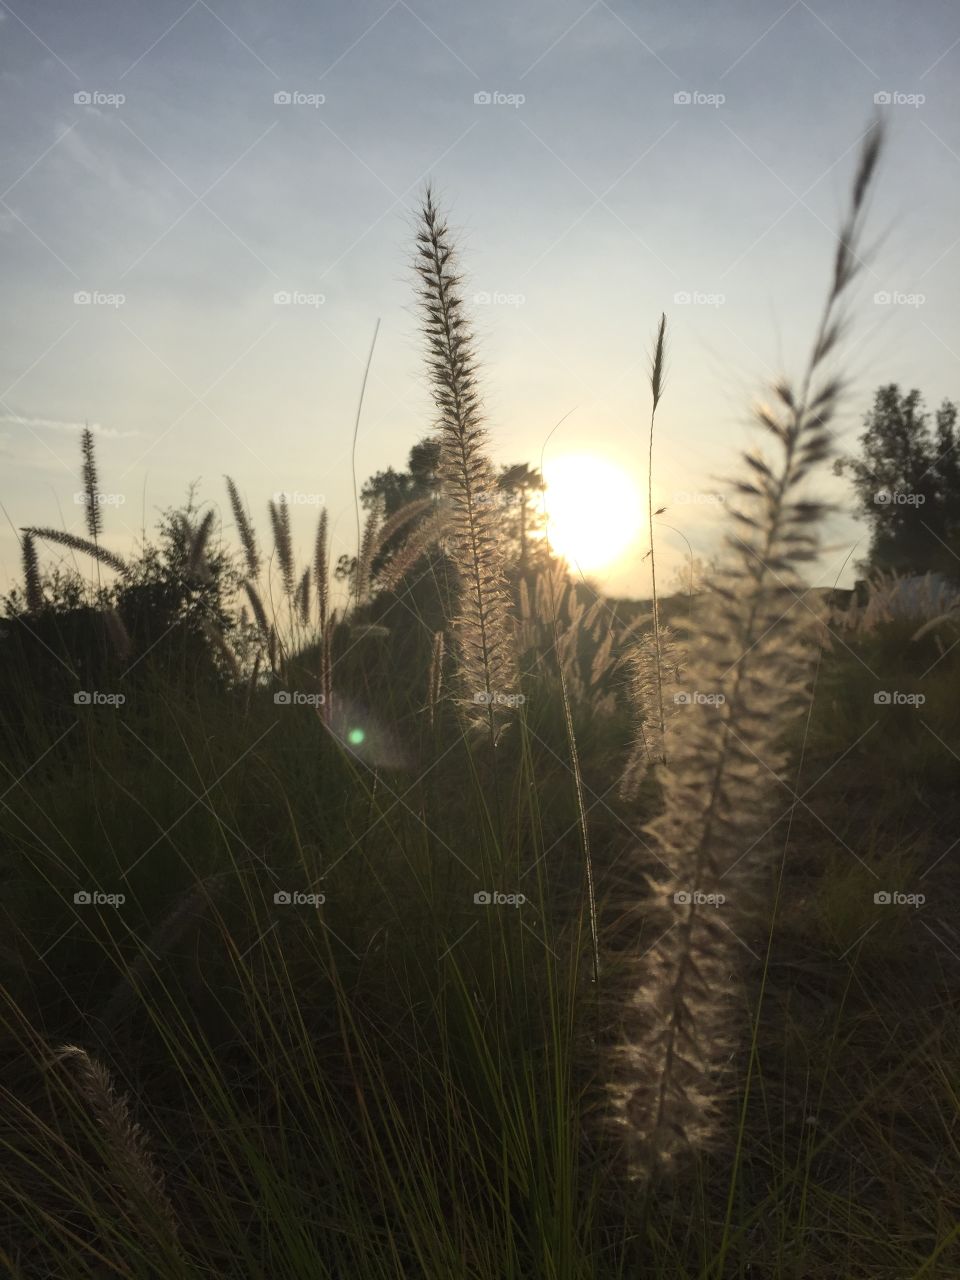 The late afternoon sunlight shines through fountain grass, commonly known by most kids as cat tails for their soft texture, in Monrovia, California. 